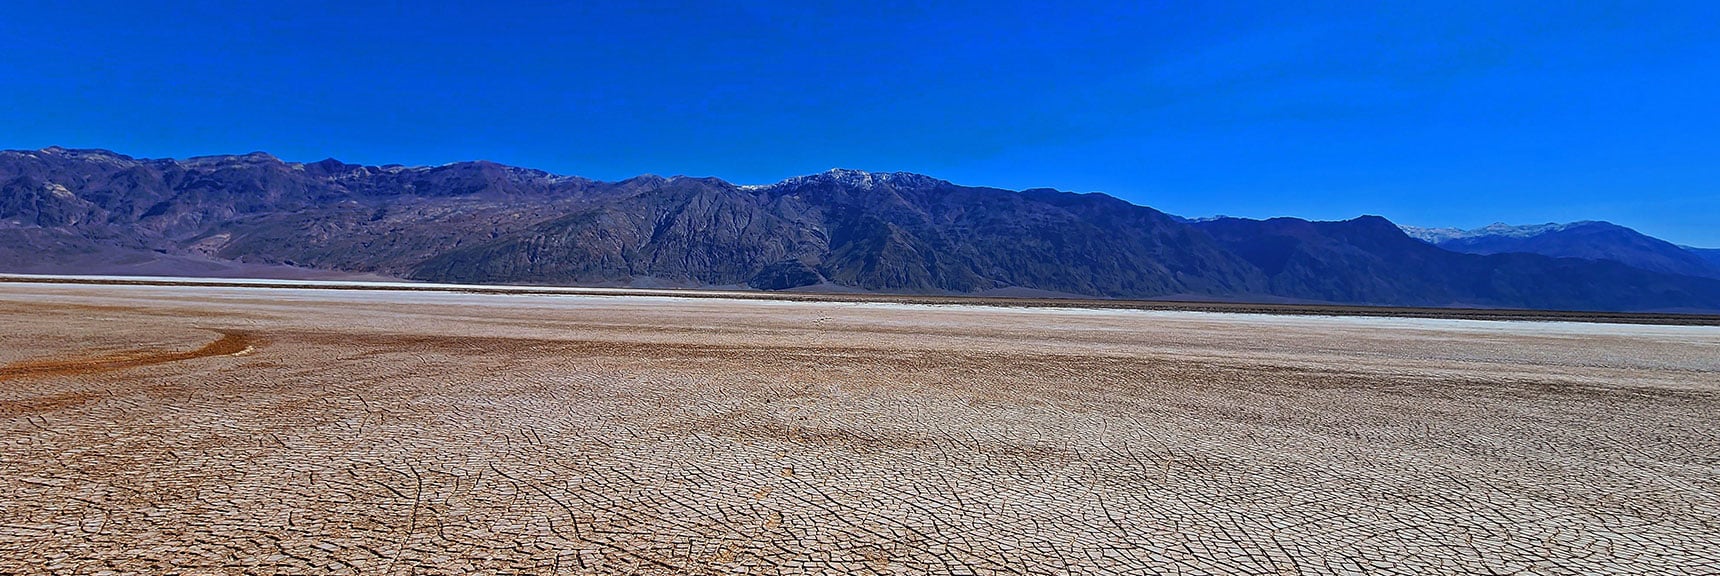 View East Toward Black Mountains from Mid Valley | Death Valley Crossing | Death Valley National Park, California | David Smith | LasVegasAreaTrails.com